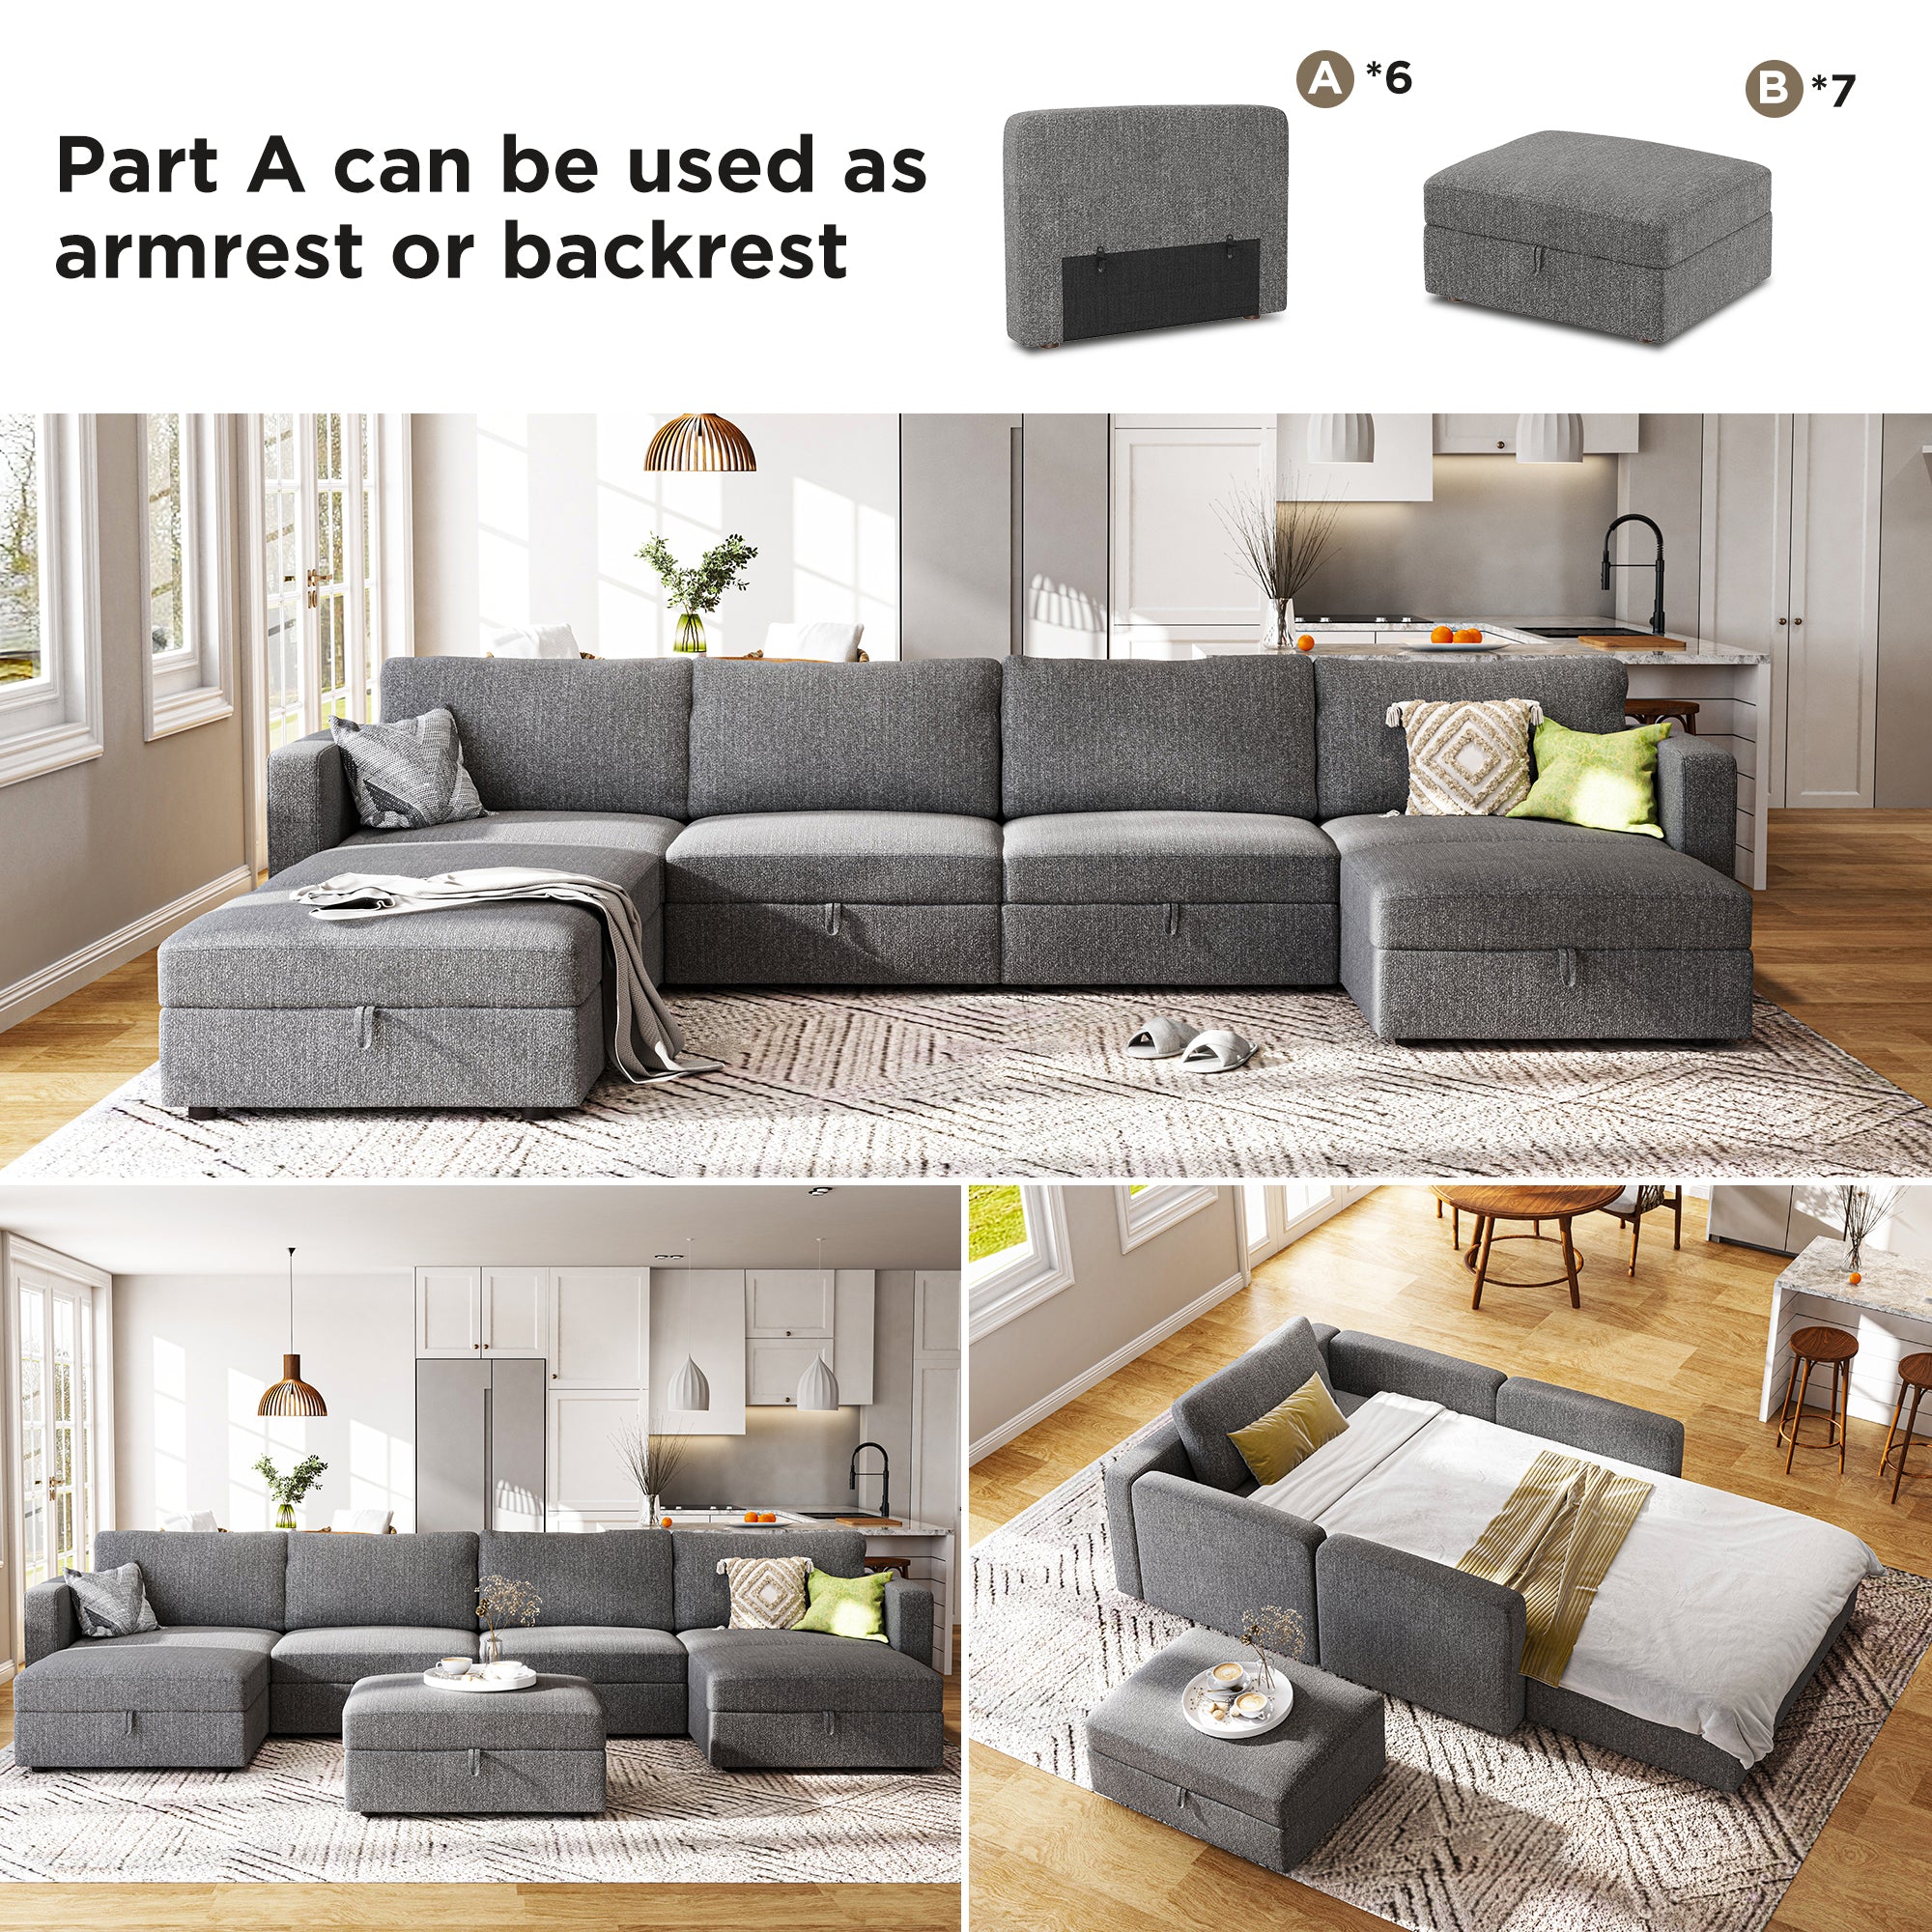 HONBAY 7-Piece Polyester Modular Sectional With Storage Seat